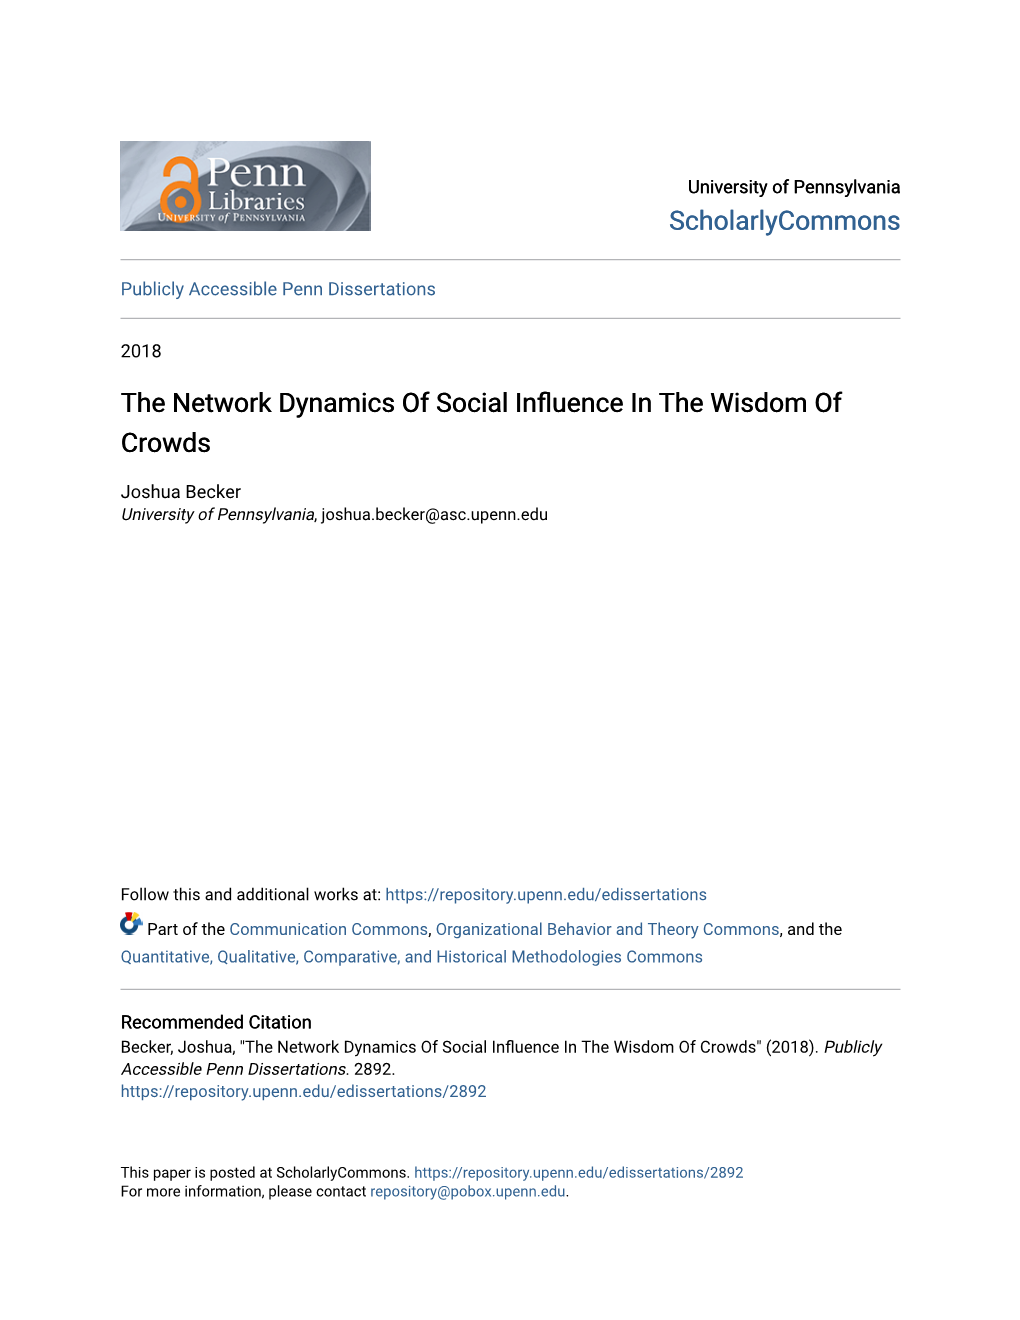 The Network Dynamics of Social Influence in the Wisdom of Crowds